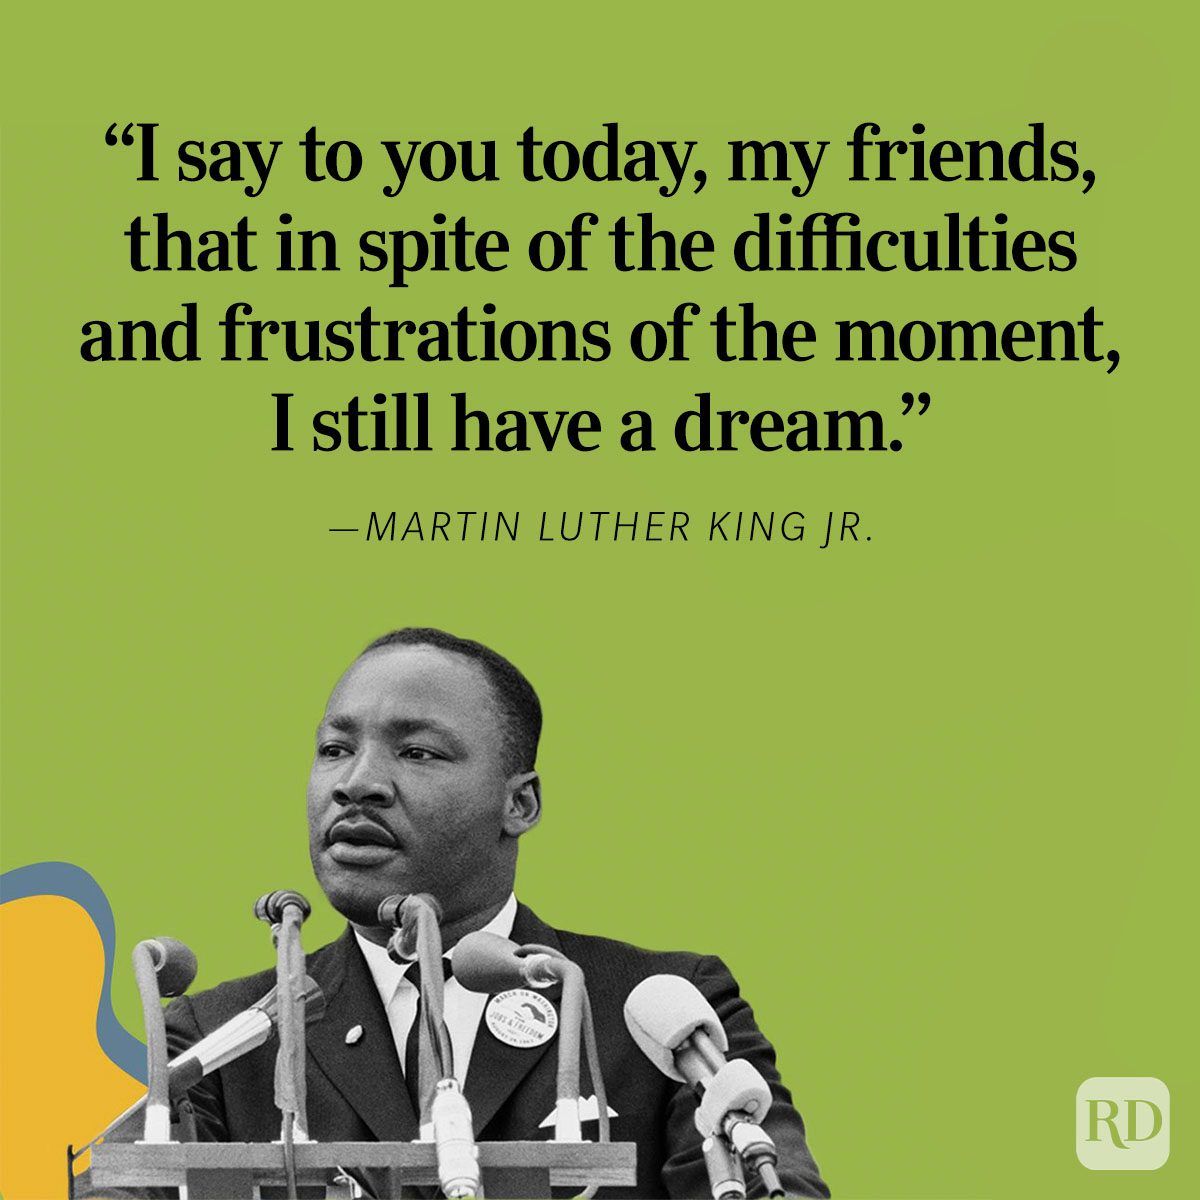 5 1/2 Quotes from MLK to Inspire You - Student Life